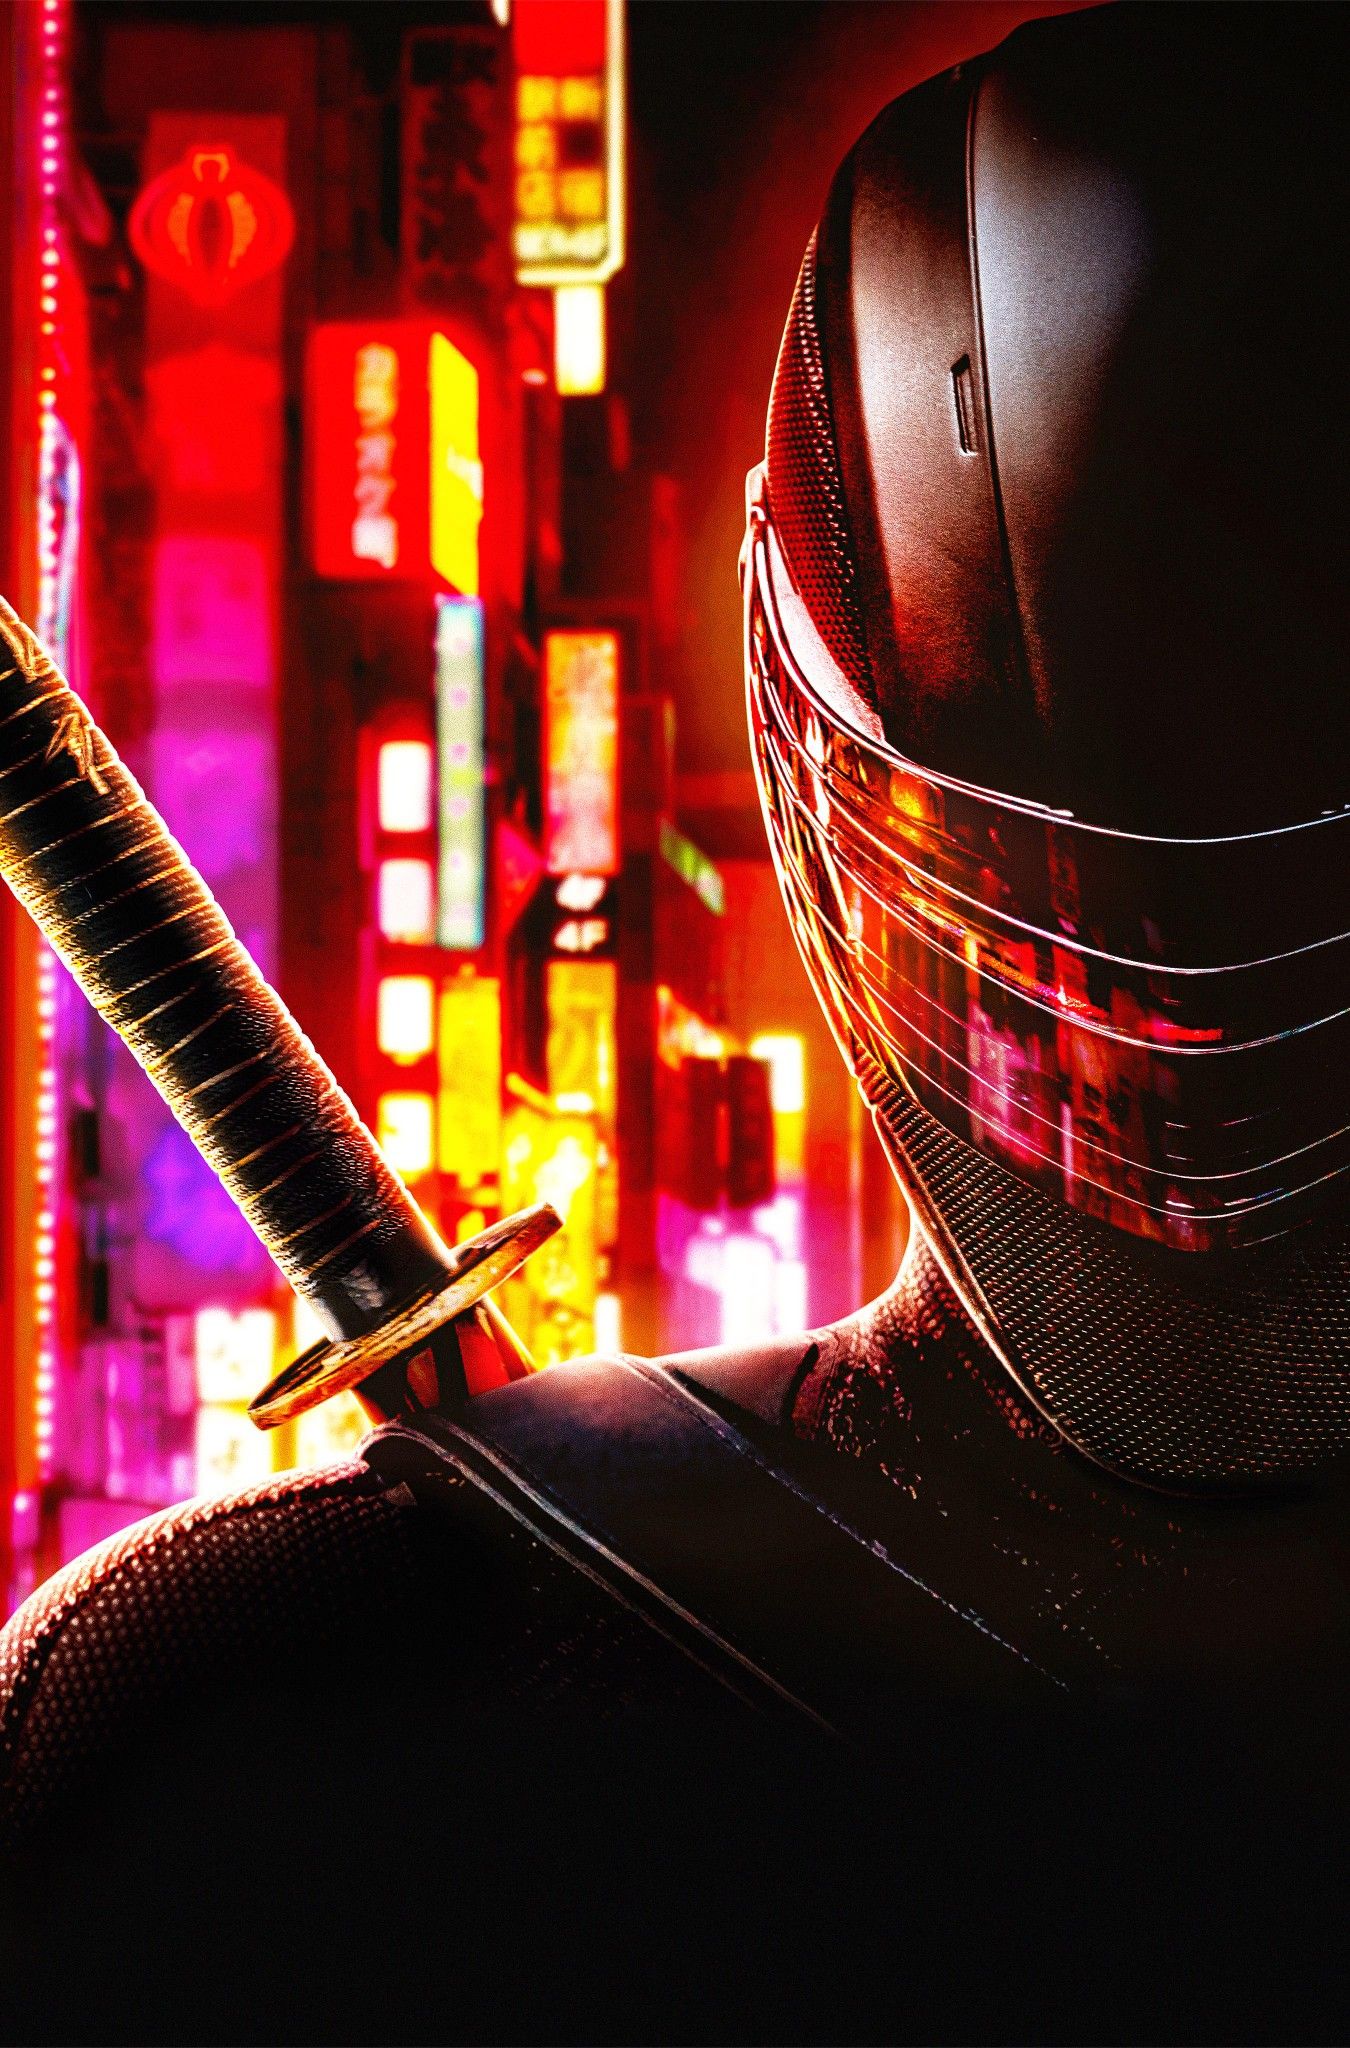 Hd Poster Of Snake Eyes Wallpapers